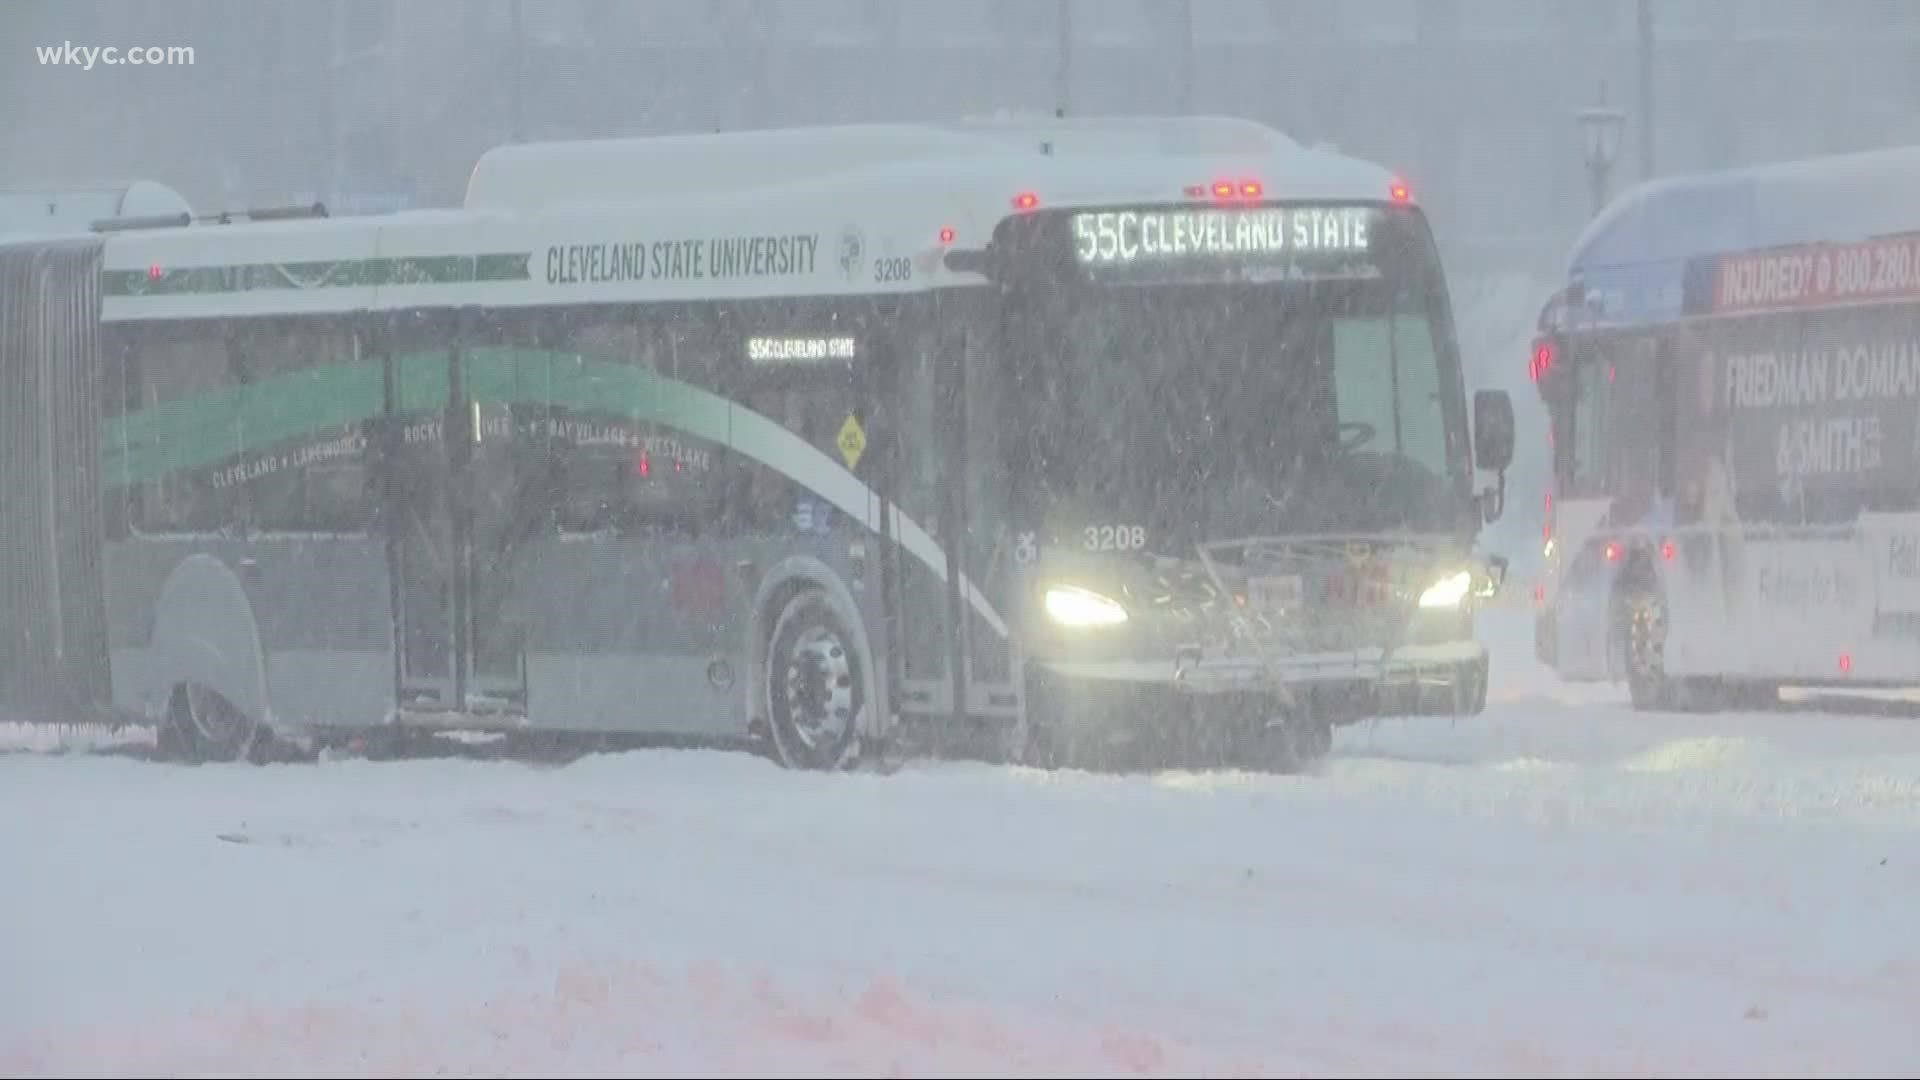 Officials with the Regional Transit Authority (RTA) of Cleveland have announced restored routes after shutting down Monday.